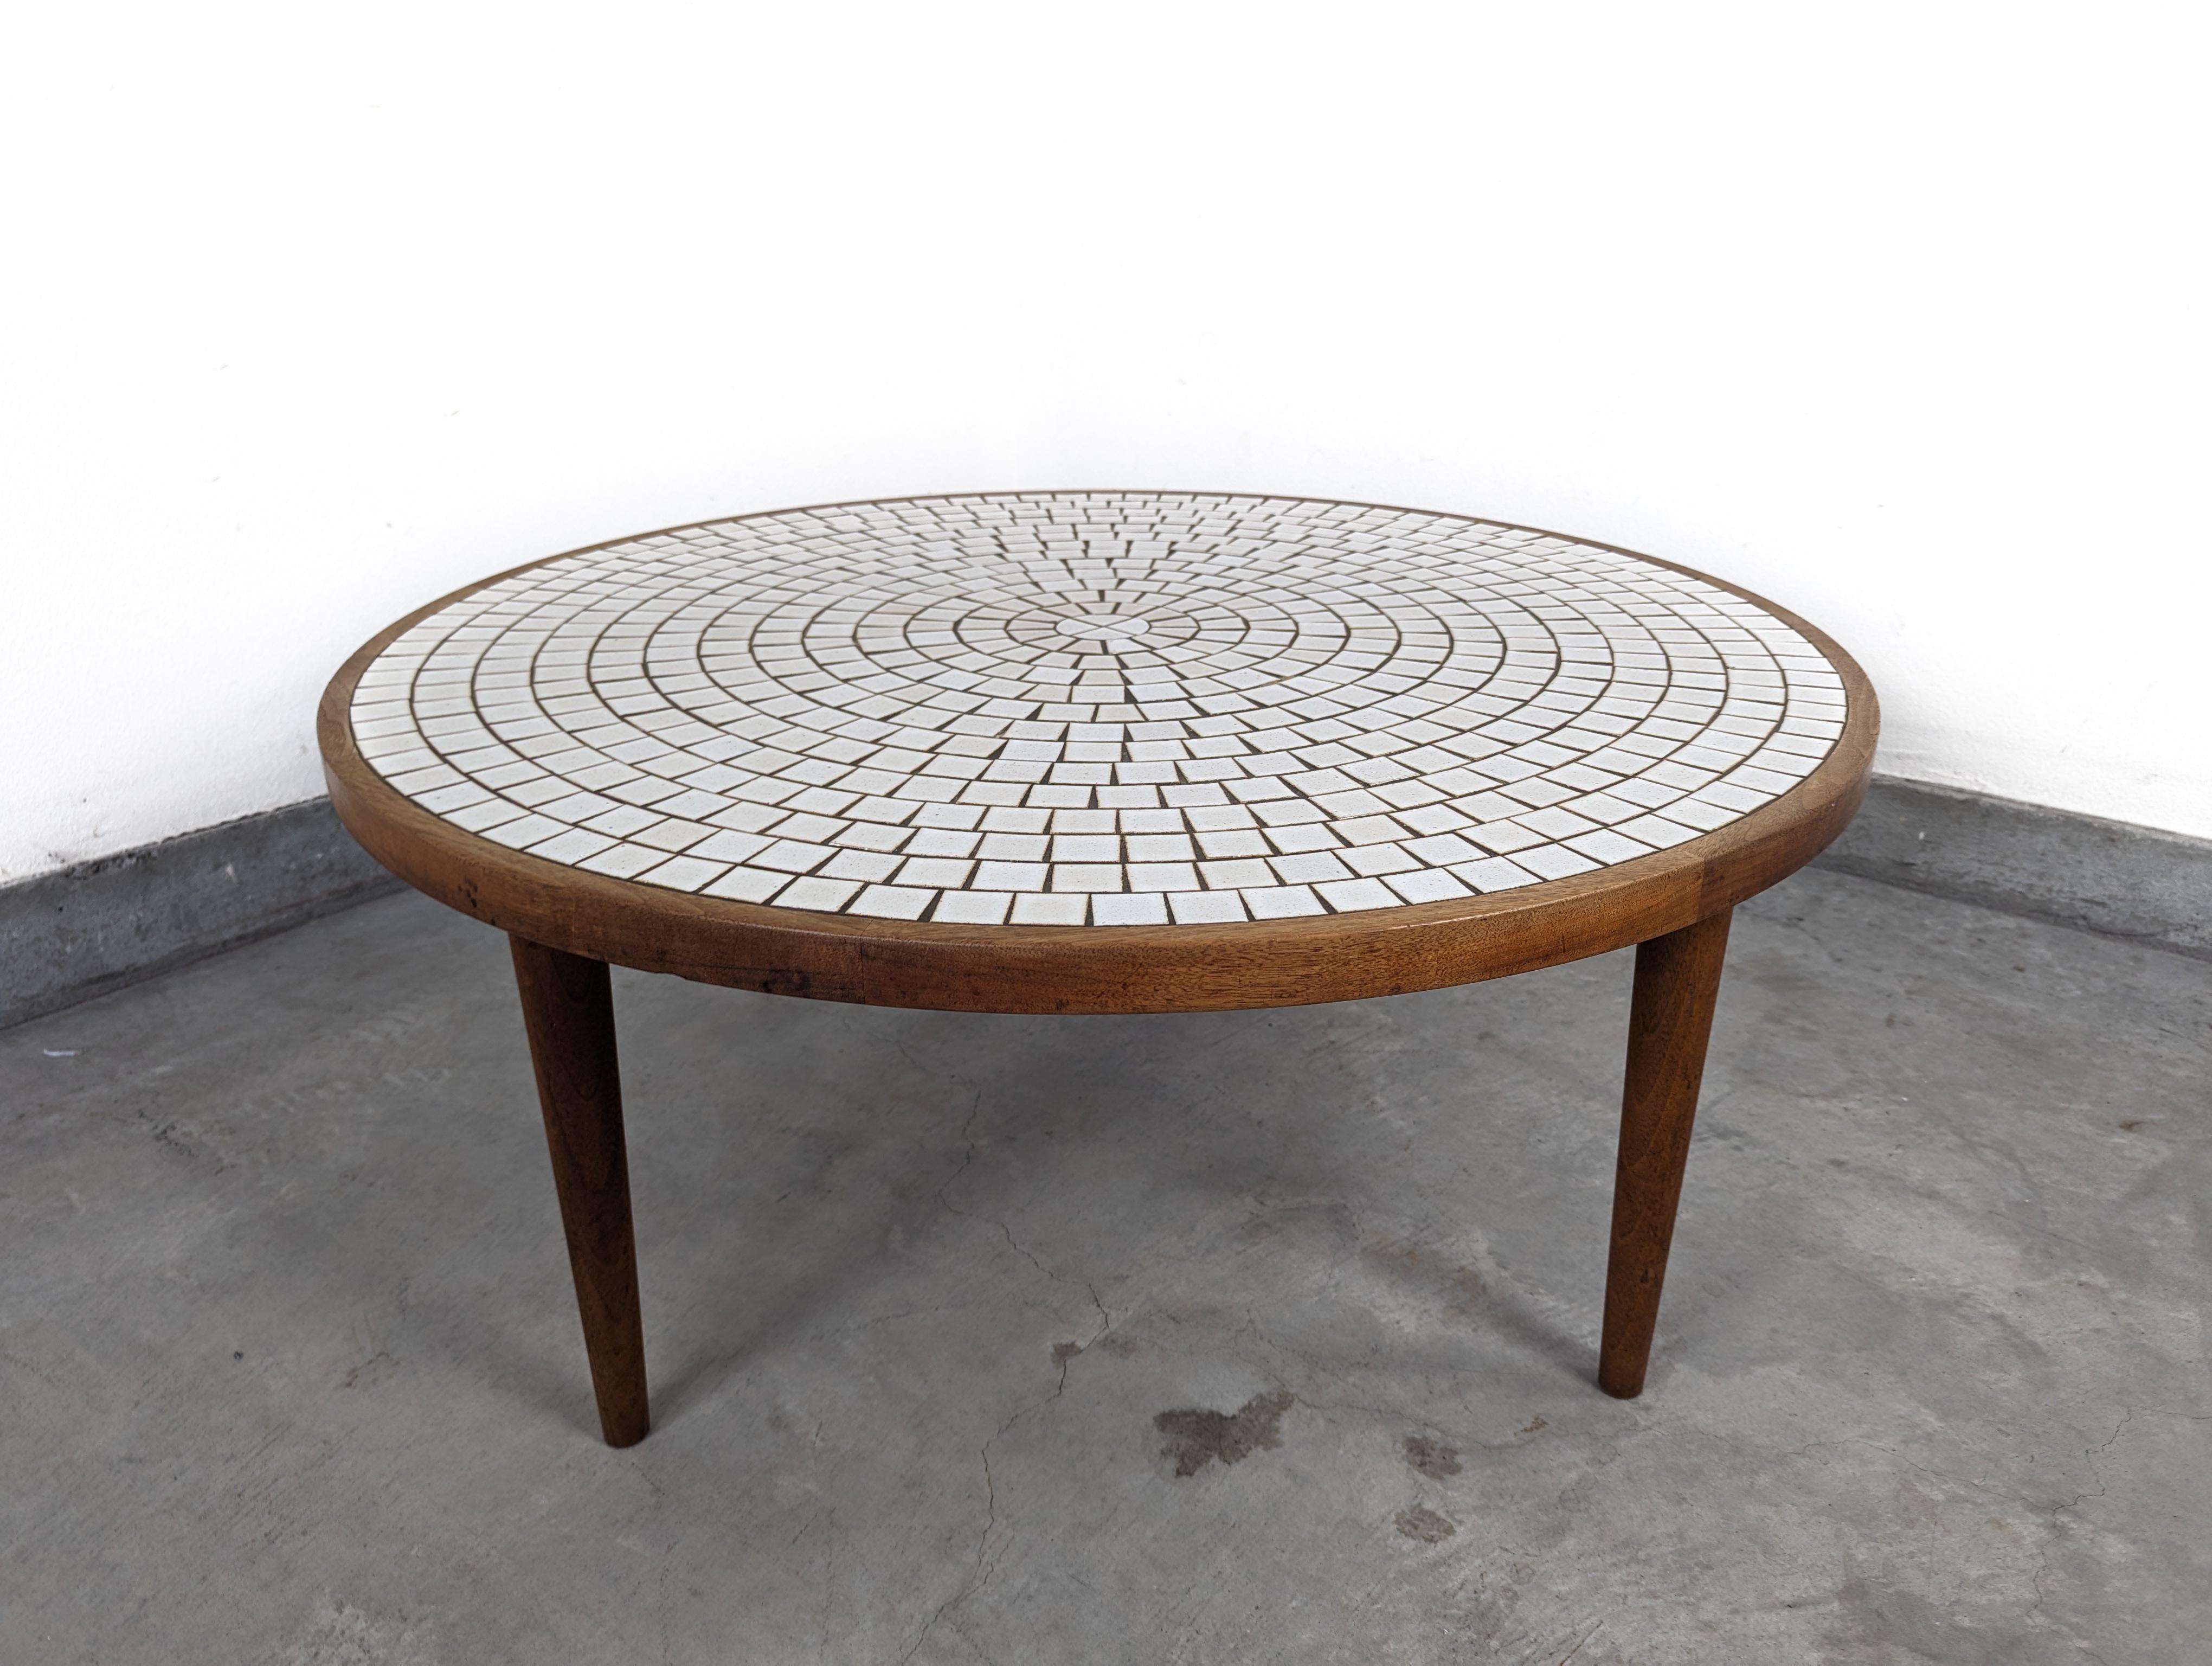 Mid Century Modern Round Coffee Table w/ Tile Top by Gordon & Jane Martz, c1960s For Sale 1